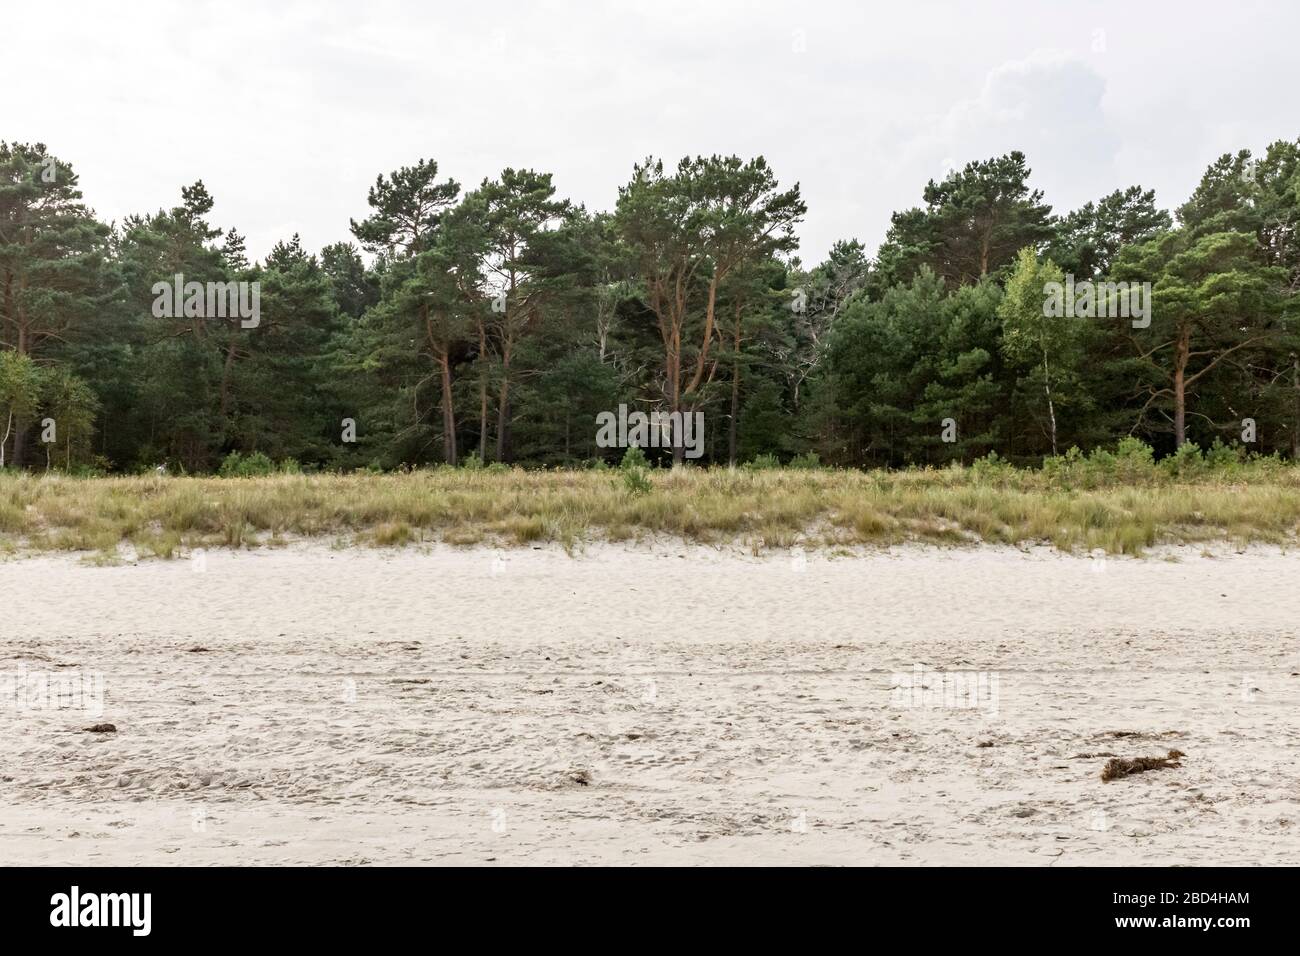 Woodland and vegetation directly behind the beach on the island of Rügen, Germany Stock Photo